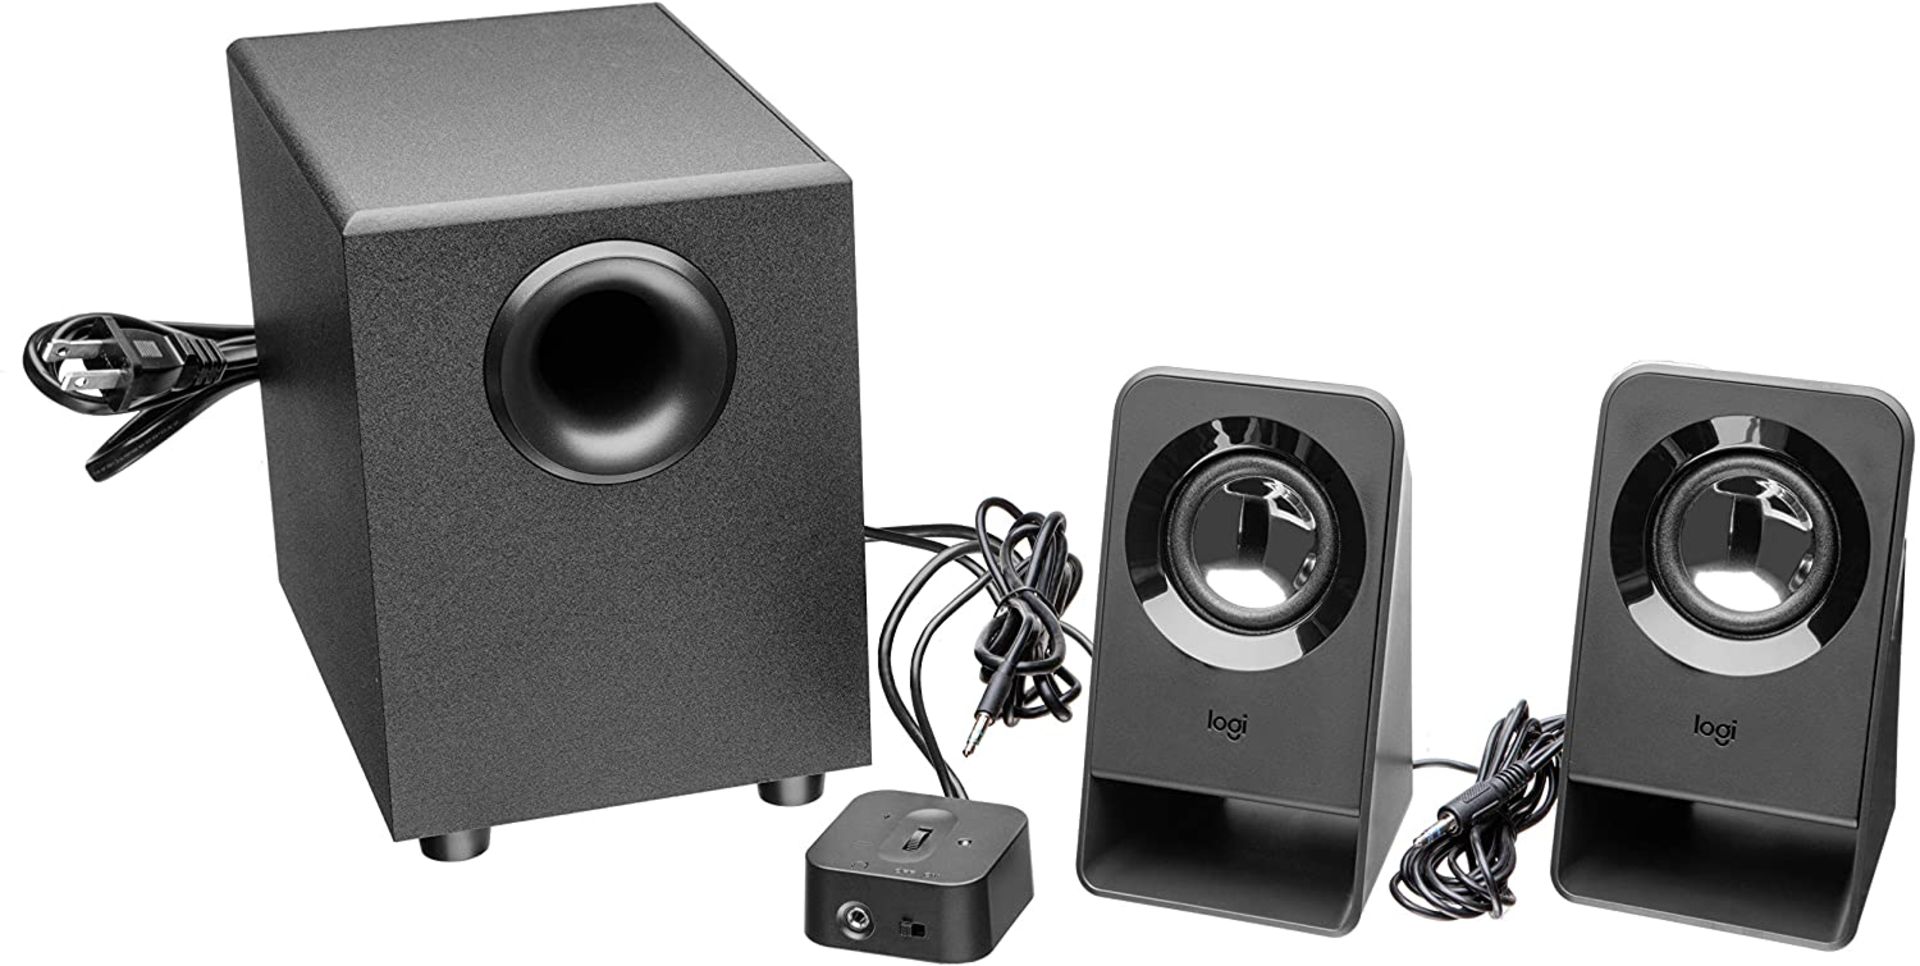 1 x Logitech Z213 Compact Multimedia PC Speaker System With Subwoofer - New Boxed Stock - Ref: - Image 3 of 5